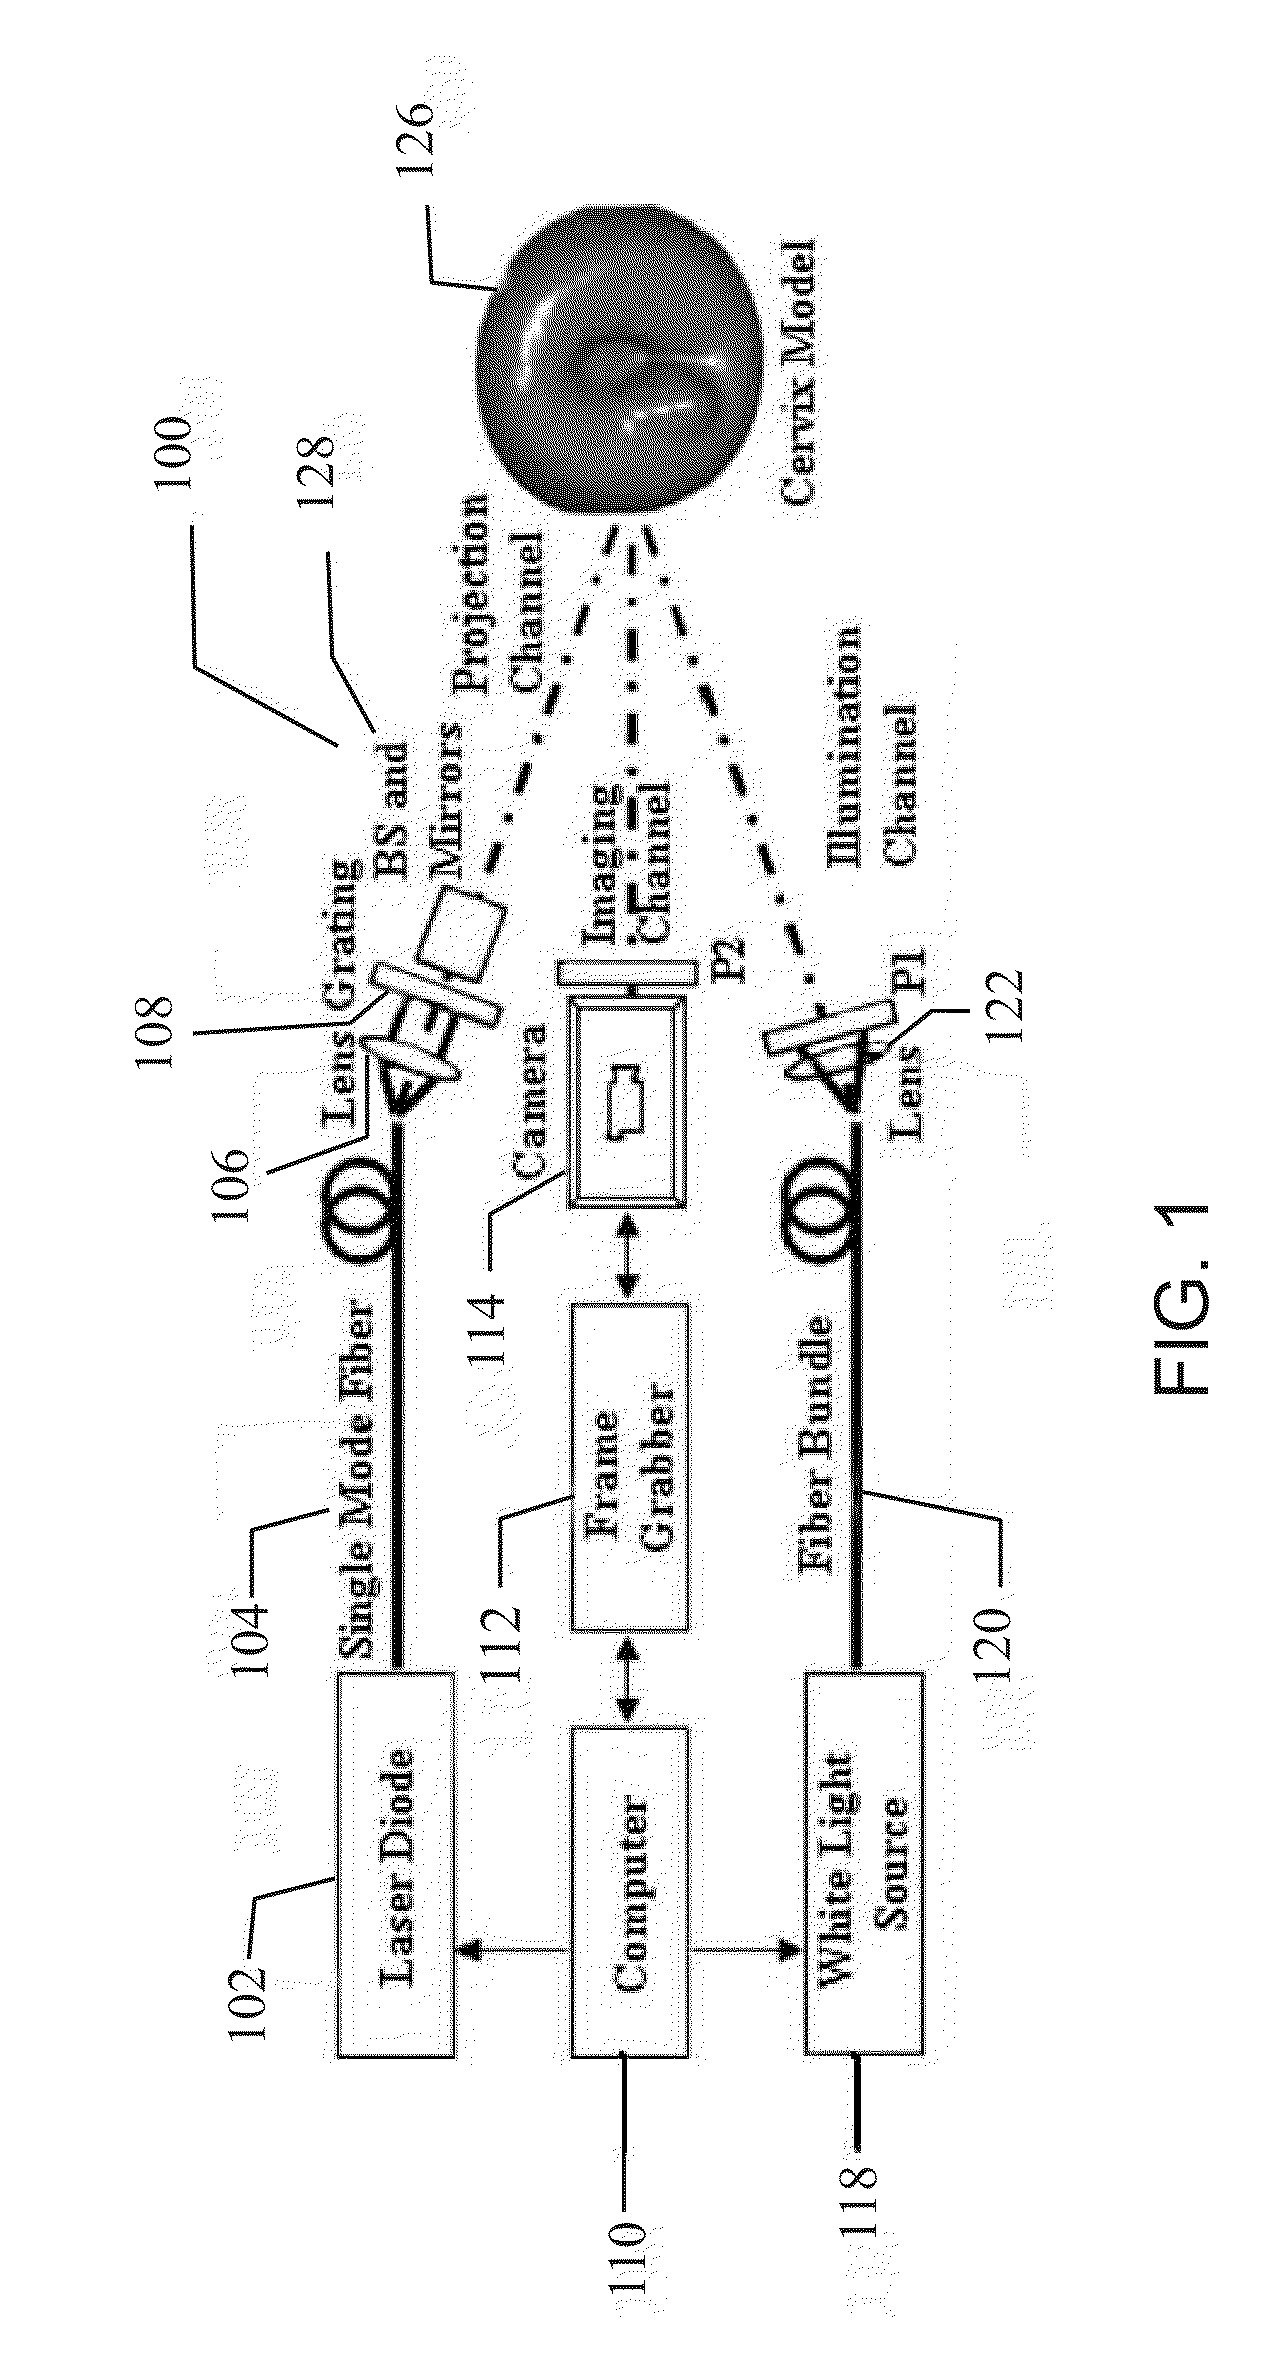 Apparatus and method of optical imaging for medical diagnosis